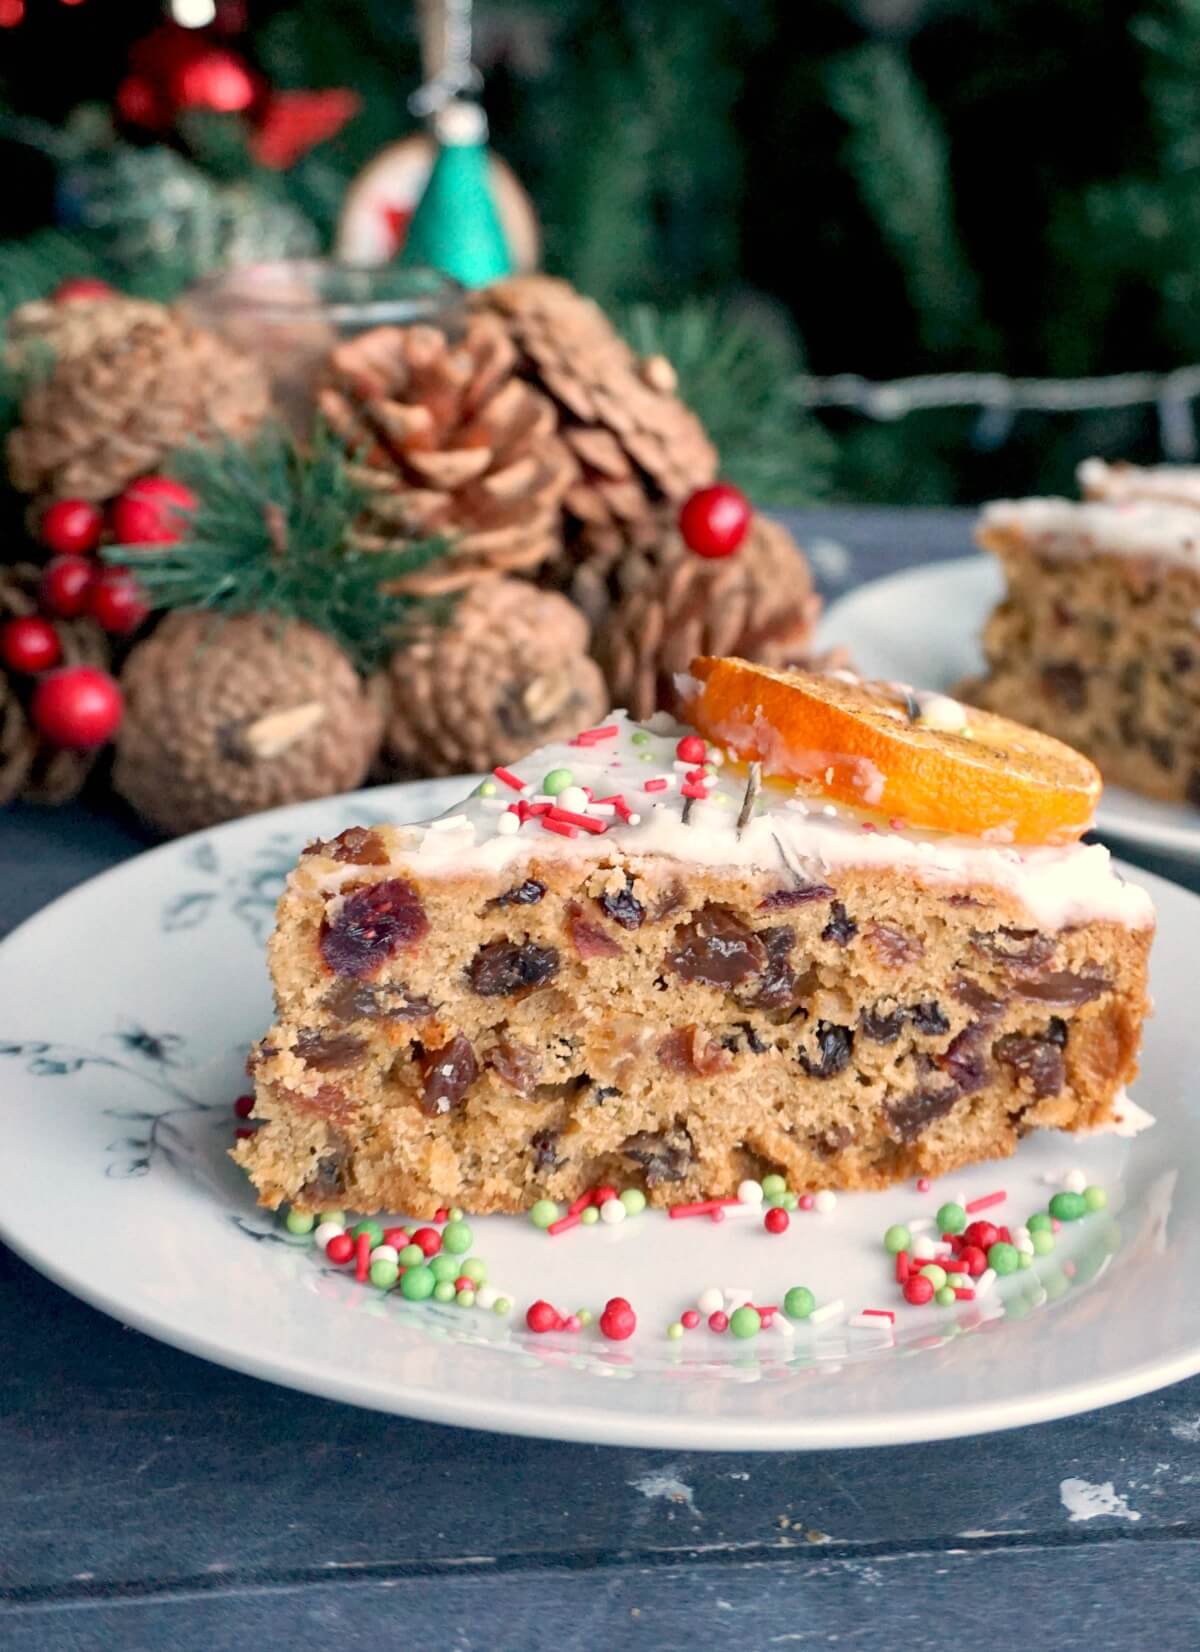 A slice of Christmas fruit cake on a white plate with Christmas decorations in the background